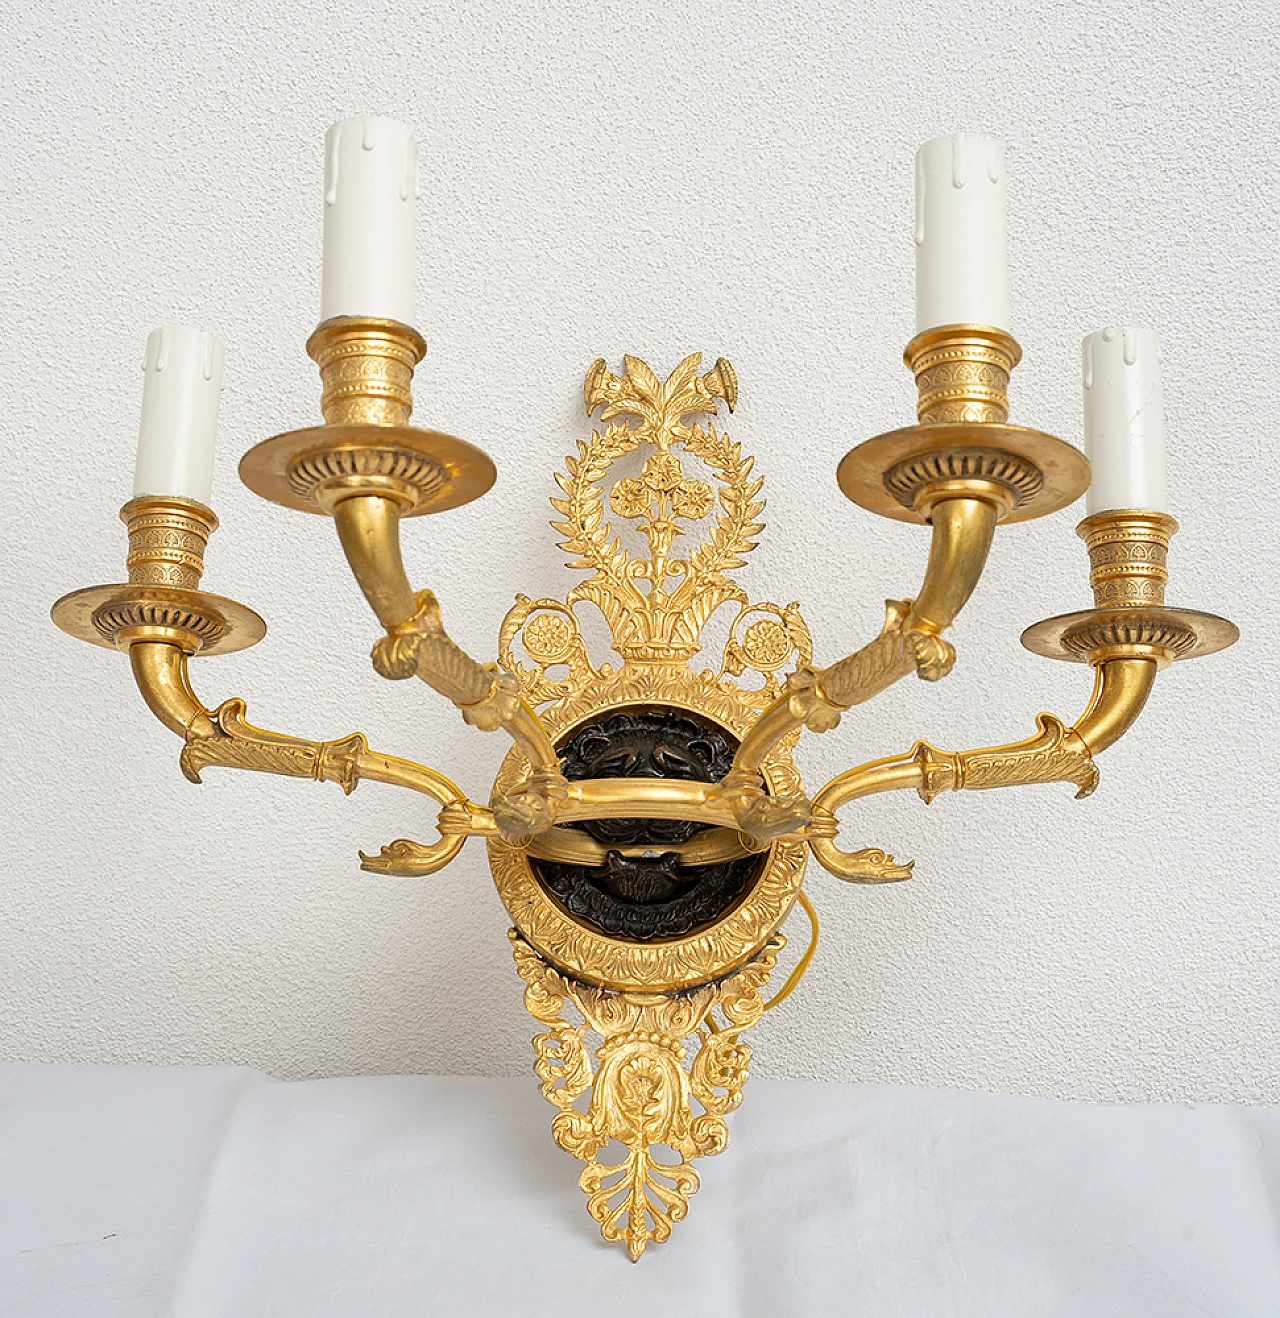 4 Empire wall lights in gilded and patinated bronze, 19th century 3